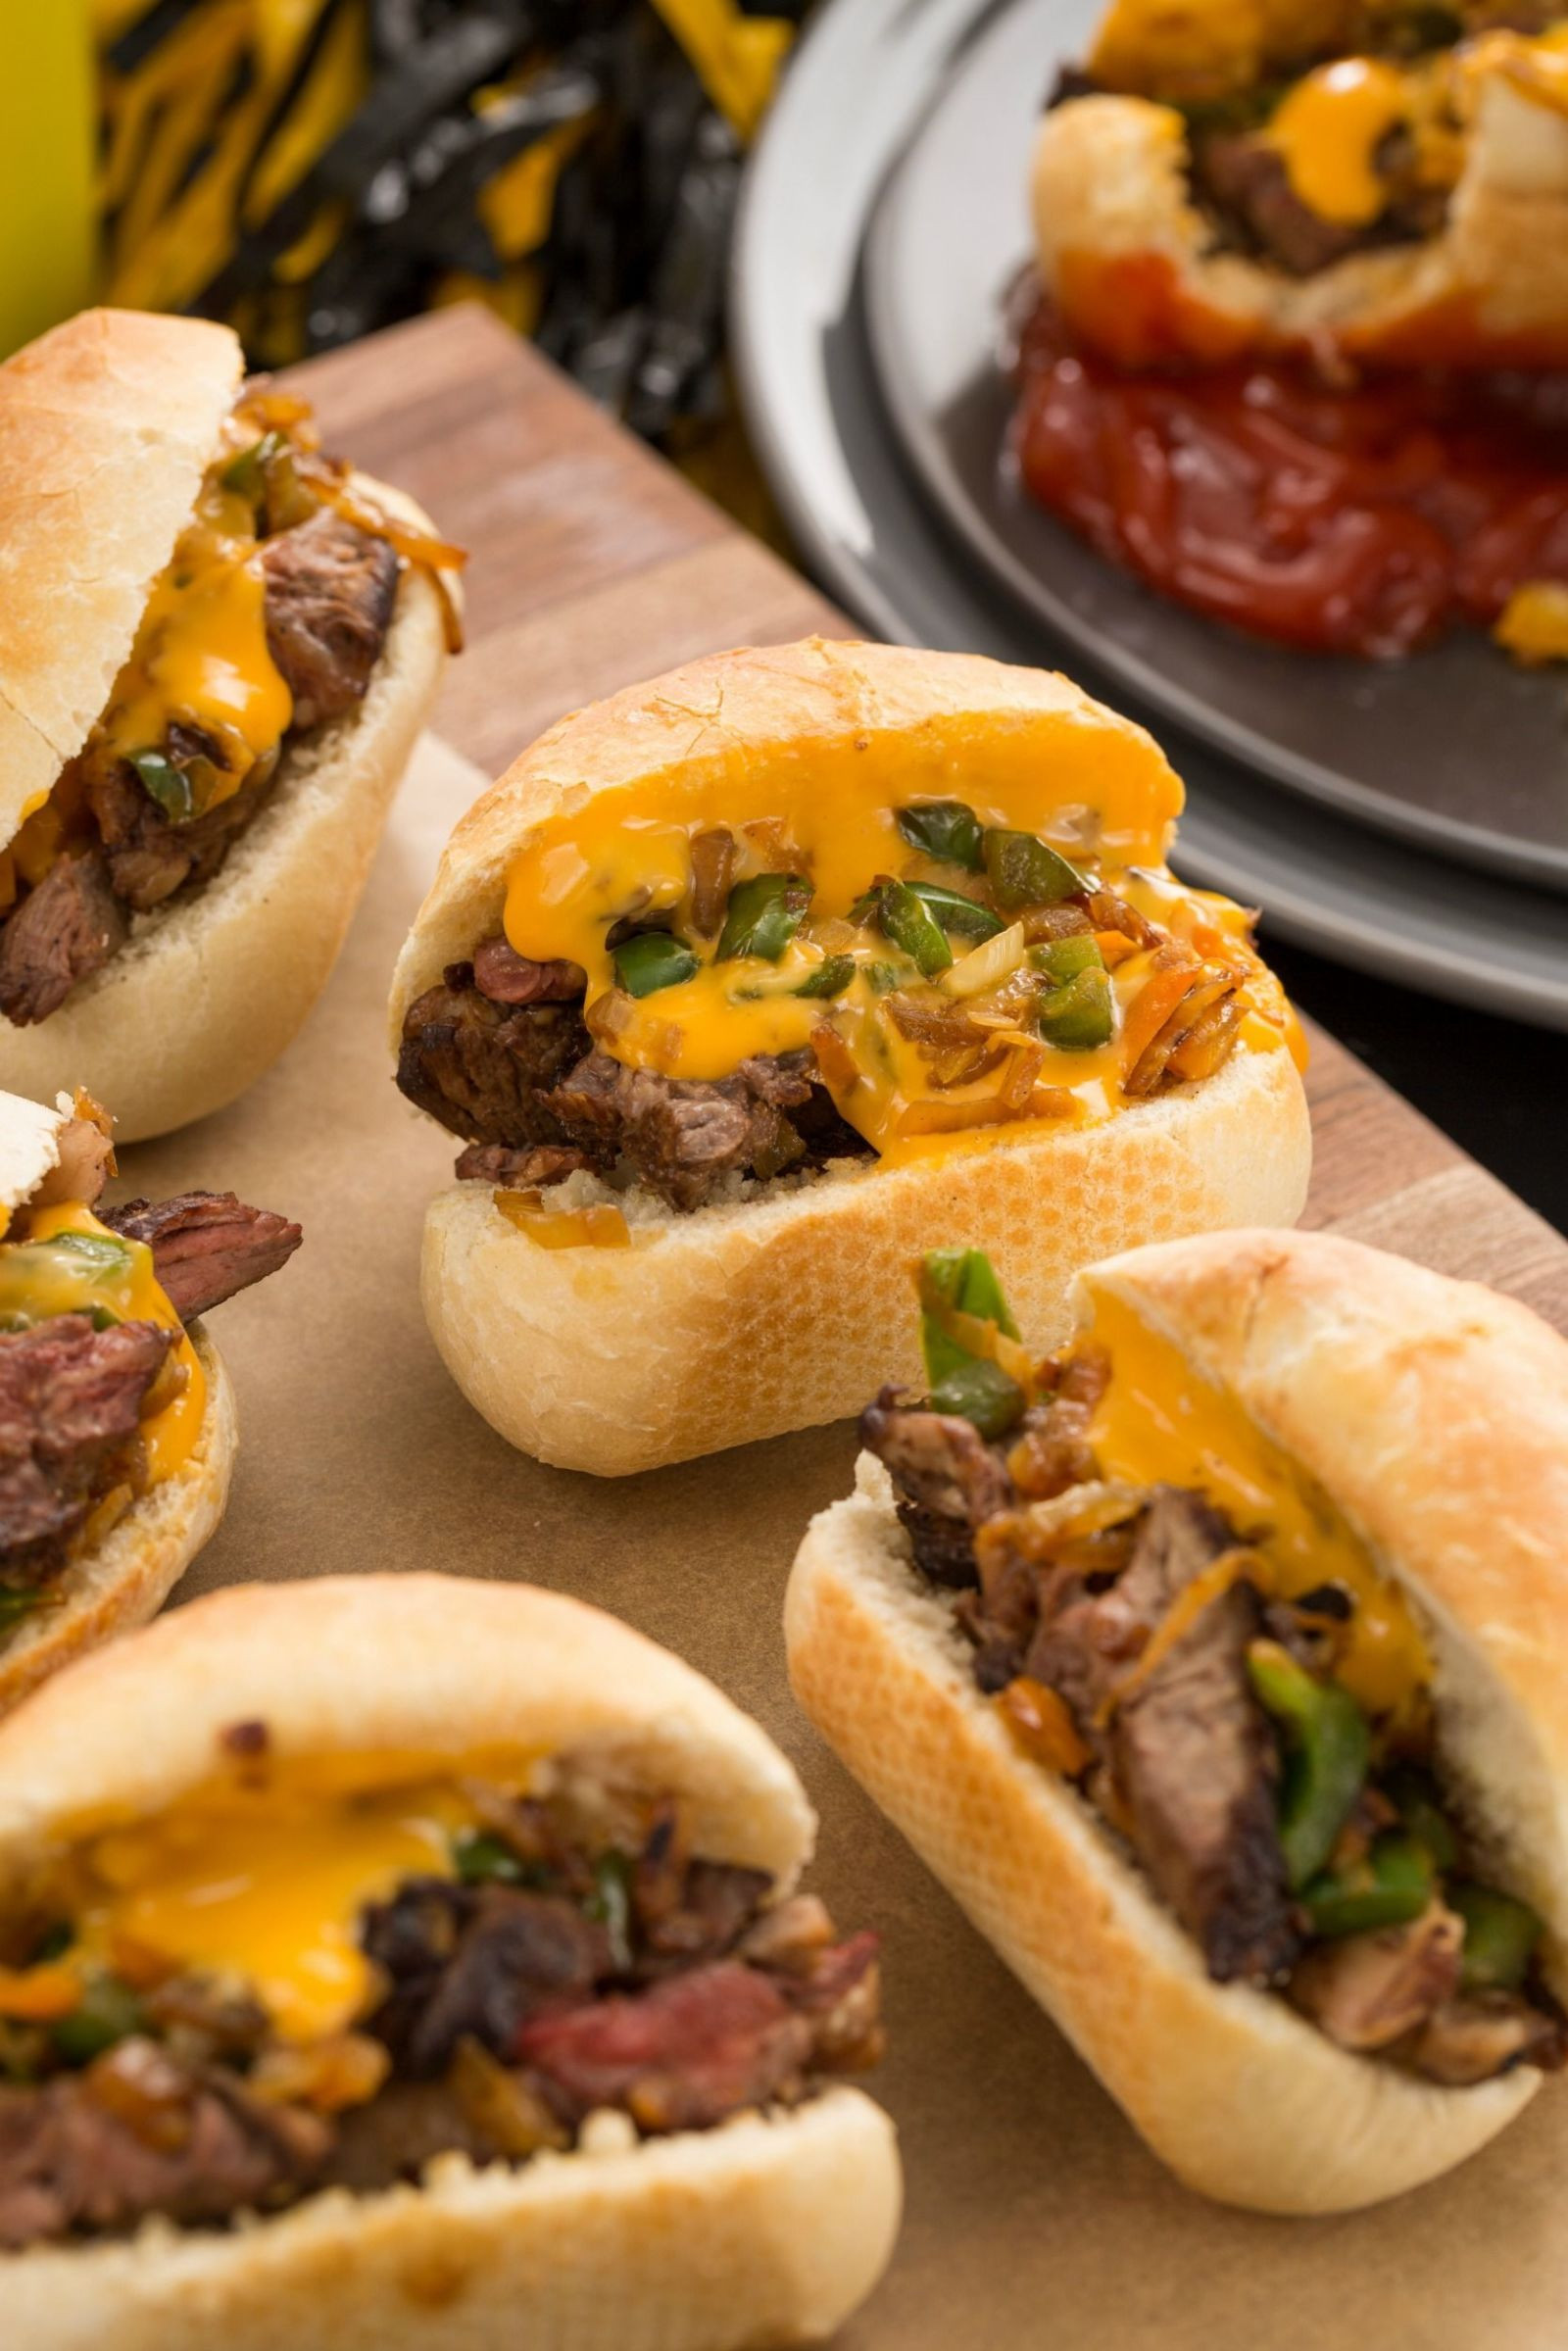 Superbowl Dinner Ideas
 These Philly Cheesesteak Sliders Are Going To Make People